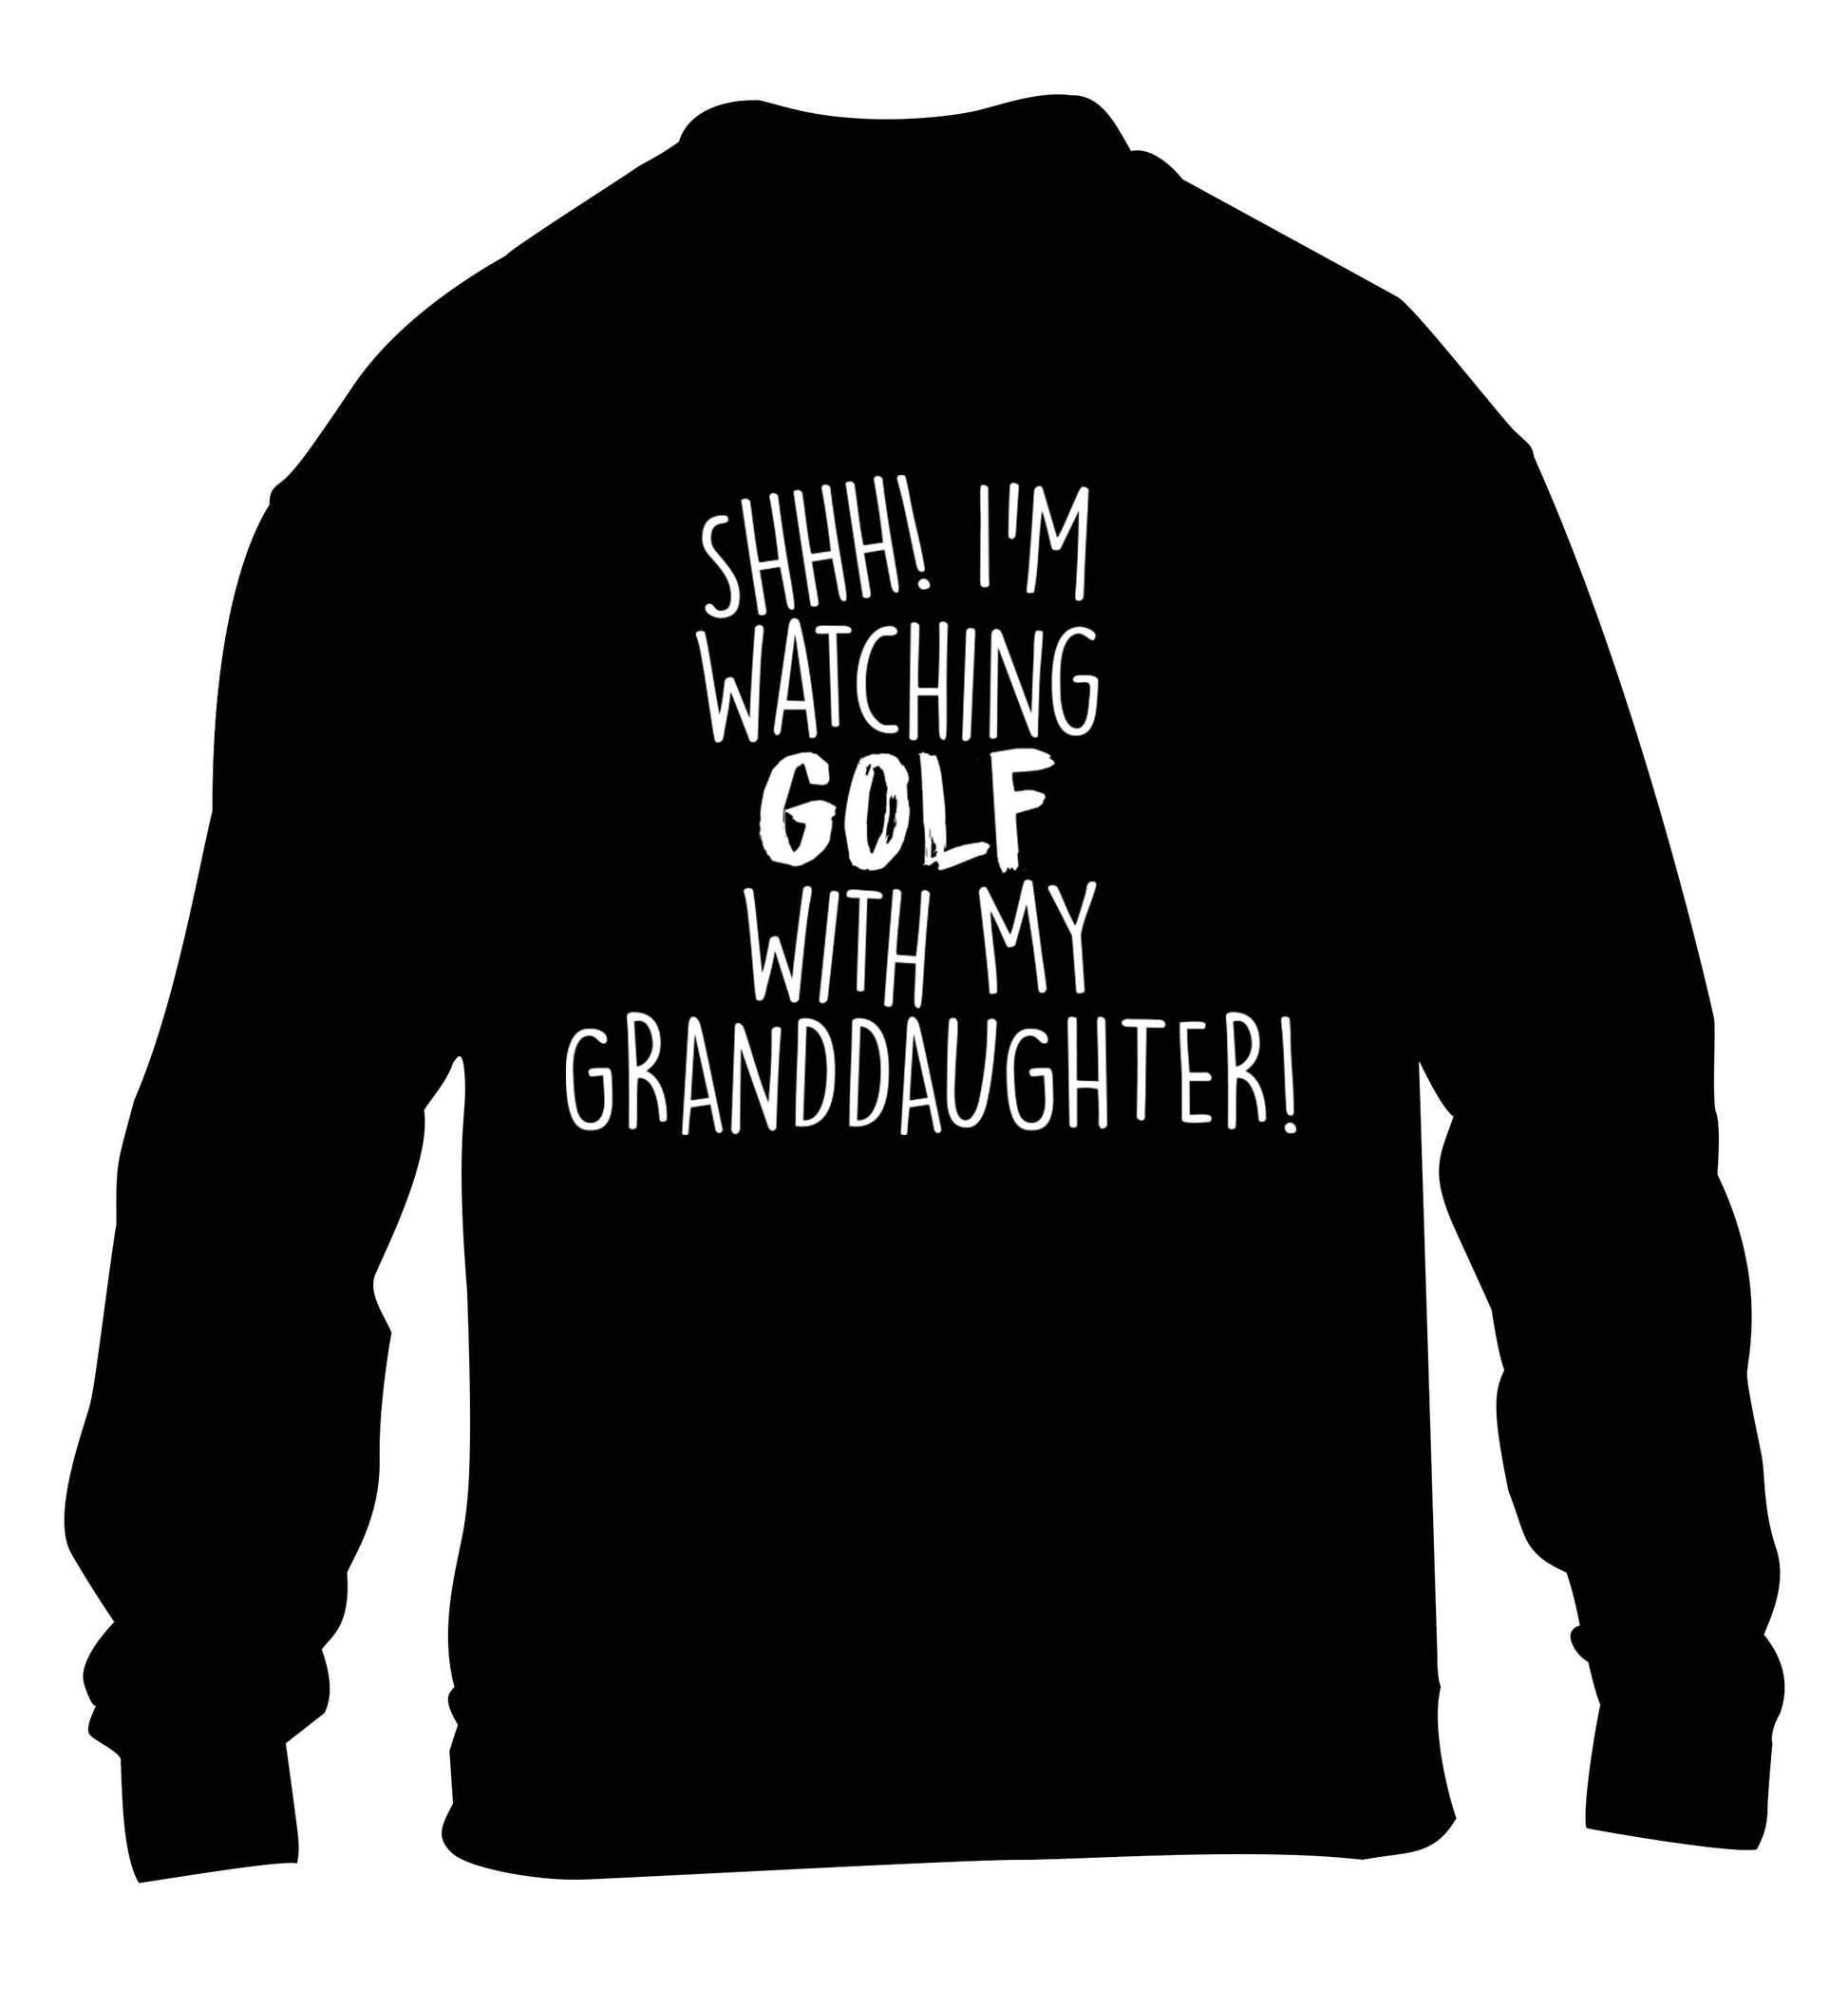 Shh I'm watching golf with my granddaughter children's black sweater 12-13 Years